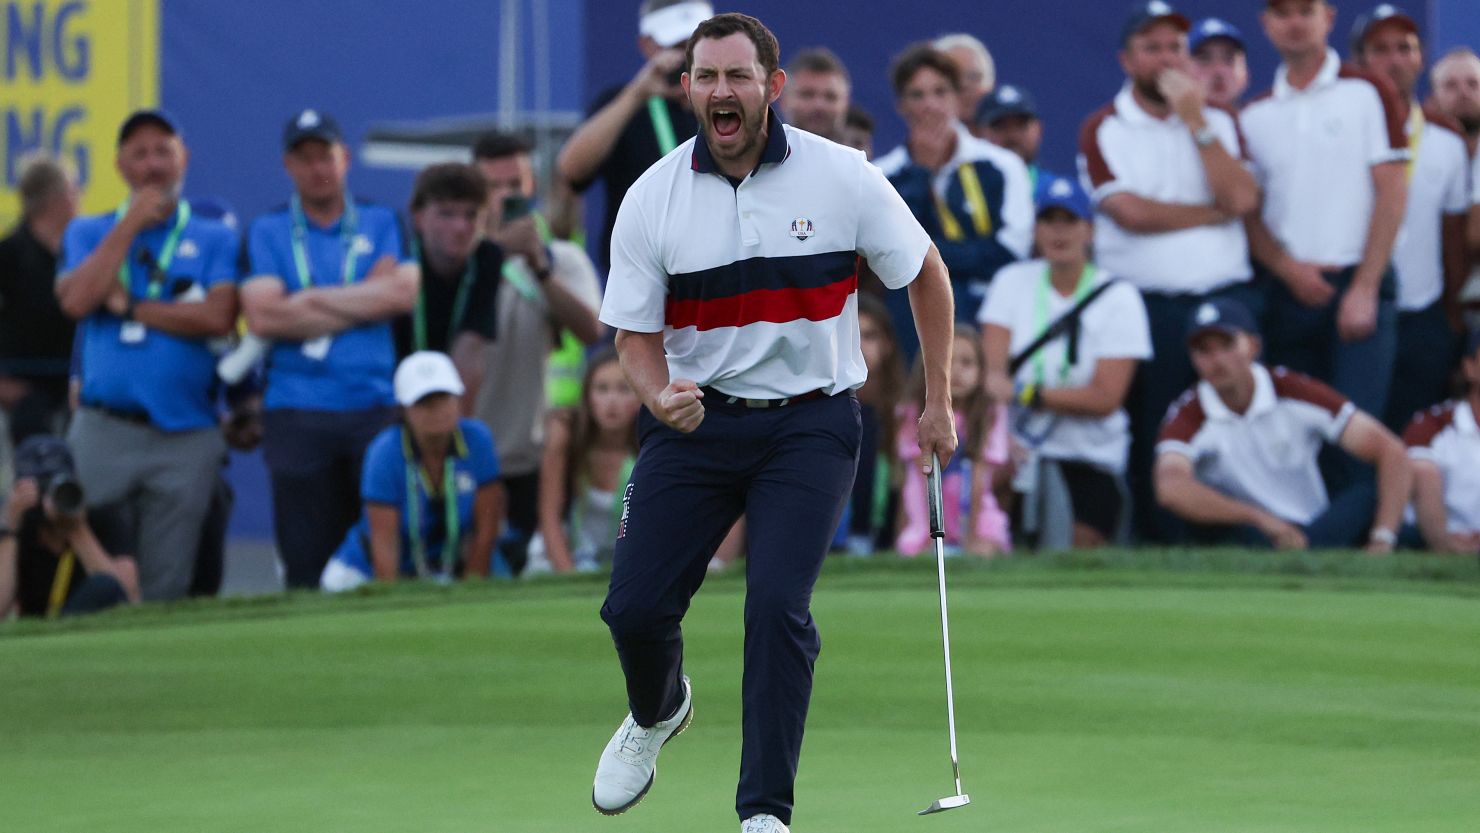 ROME, ITALY - SEPTEMBER 30: Patrick Cantlay of Team United States gestures in celebration of winning his match 1 up during the Saturday afternoon fourball matches of the 2023 Ryder Cup at Marco Simone Golf Club on September 30, 2023 in Rome, Italy. (Photo by Jamie Squire/Getty Images)